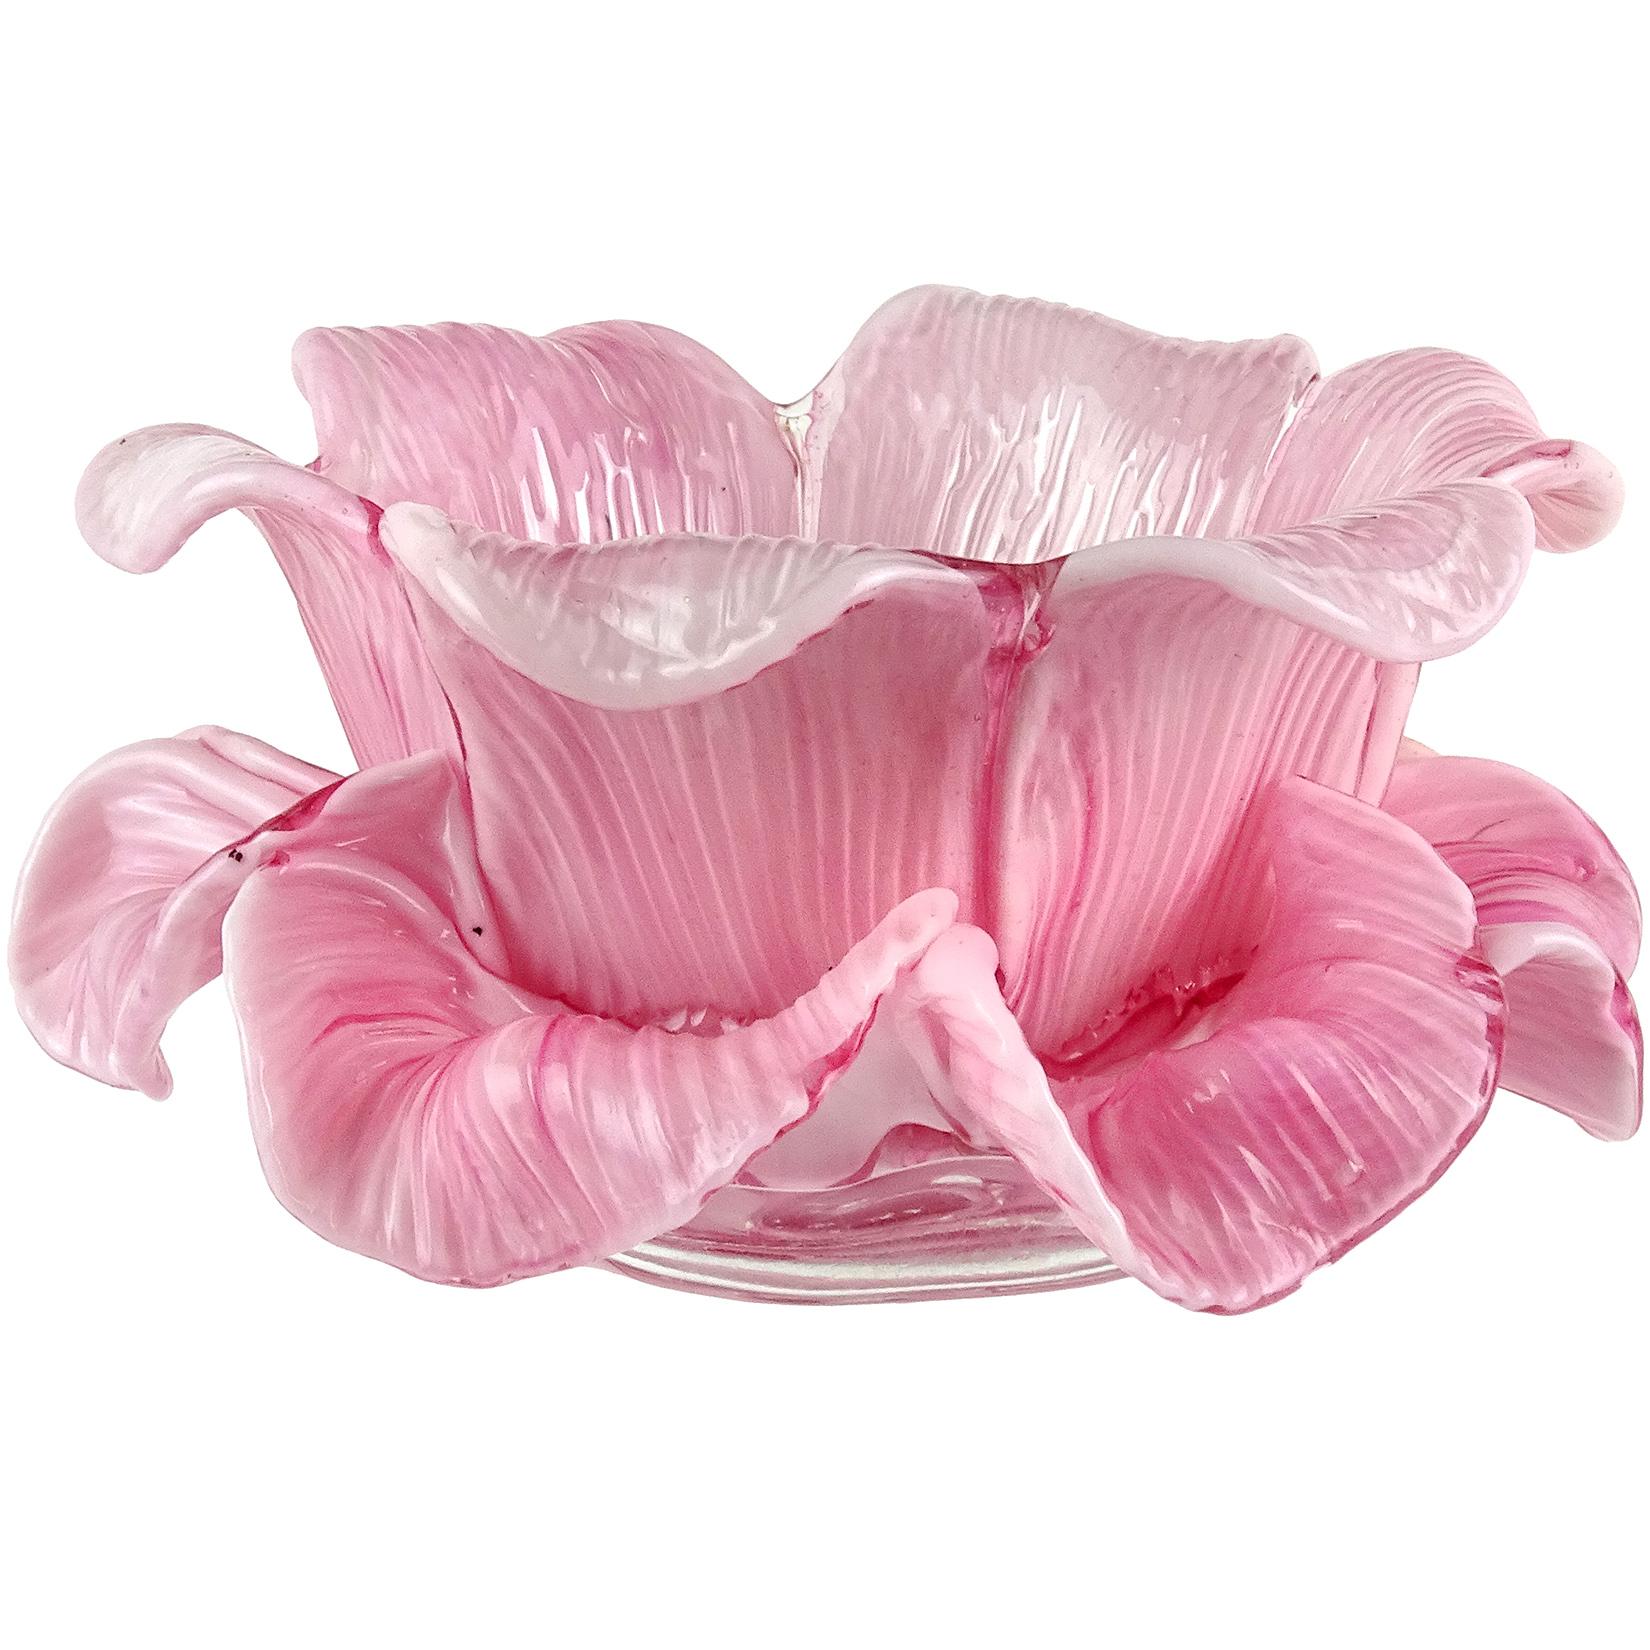 Hand-Crafted Toso Murano Pink White Mottled Double Petal Italian Art Glass Flower Bowls